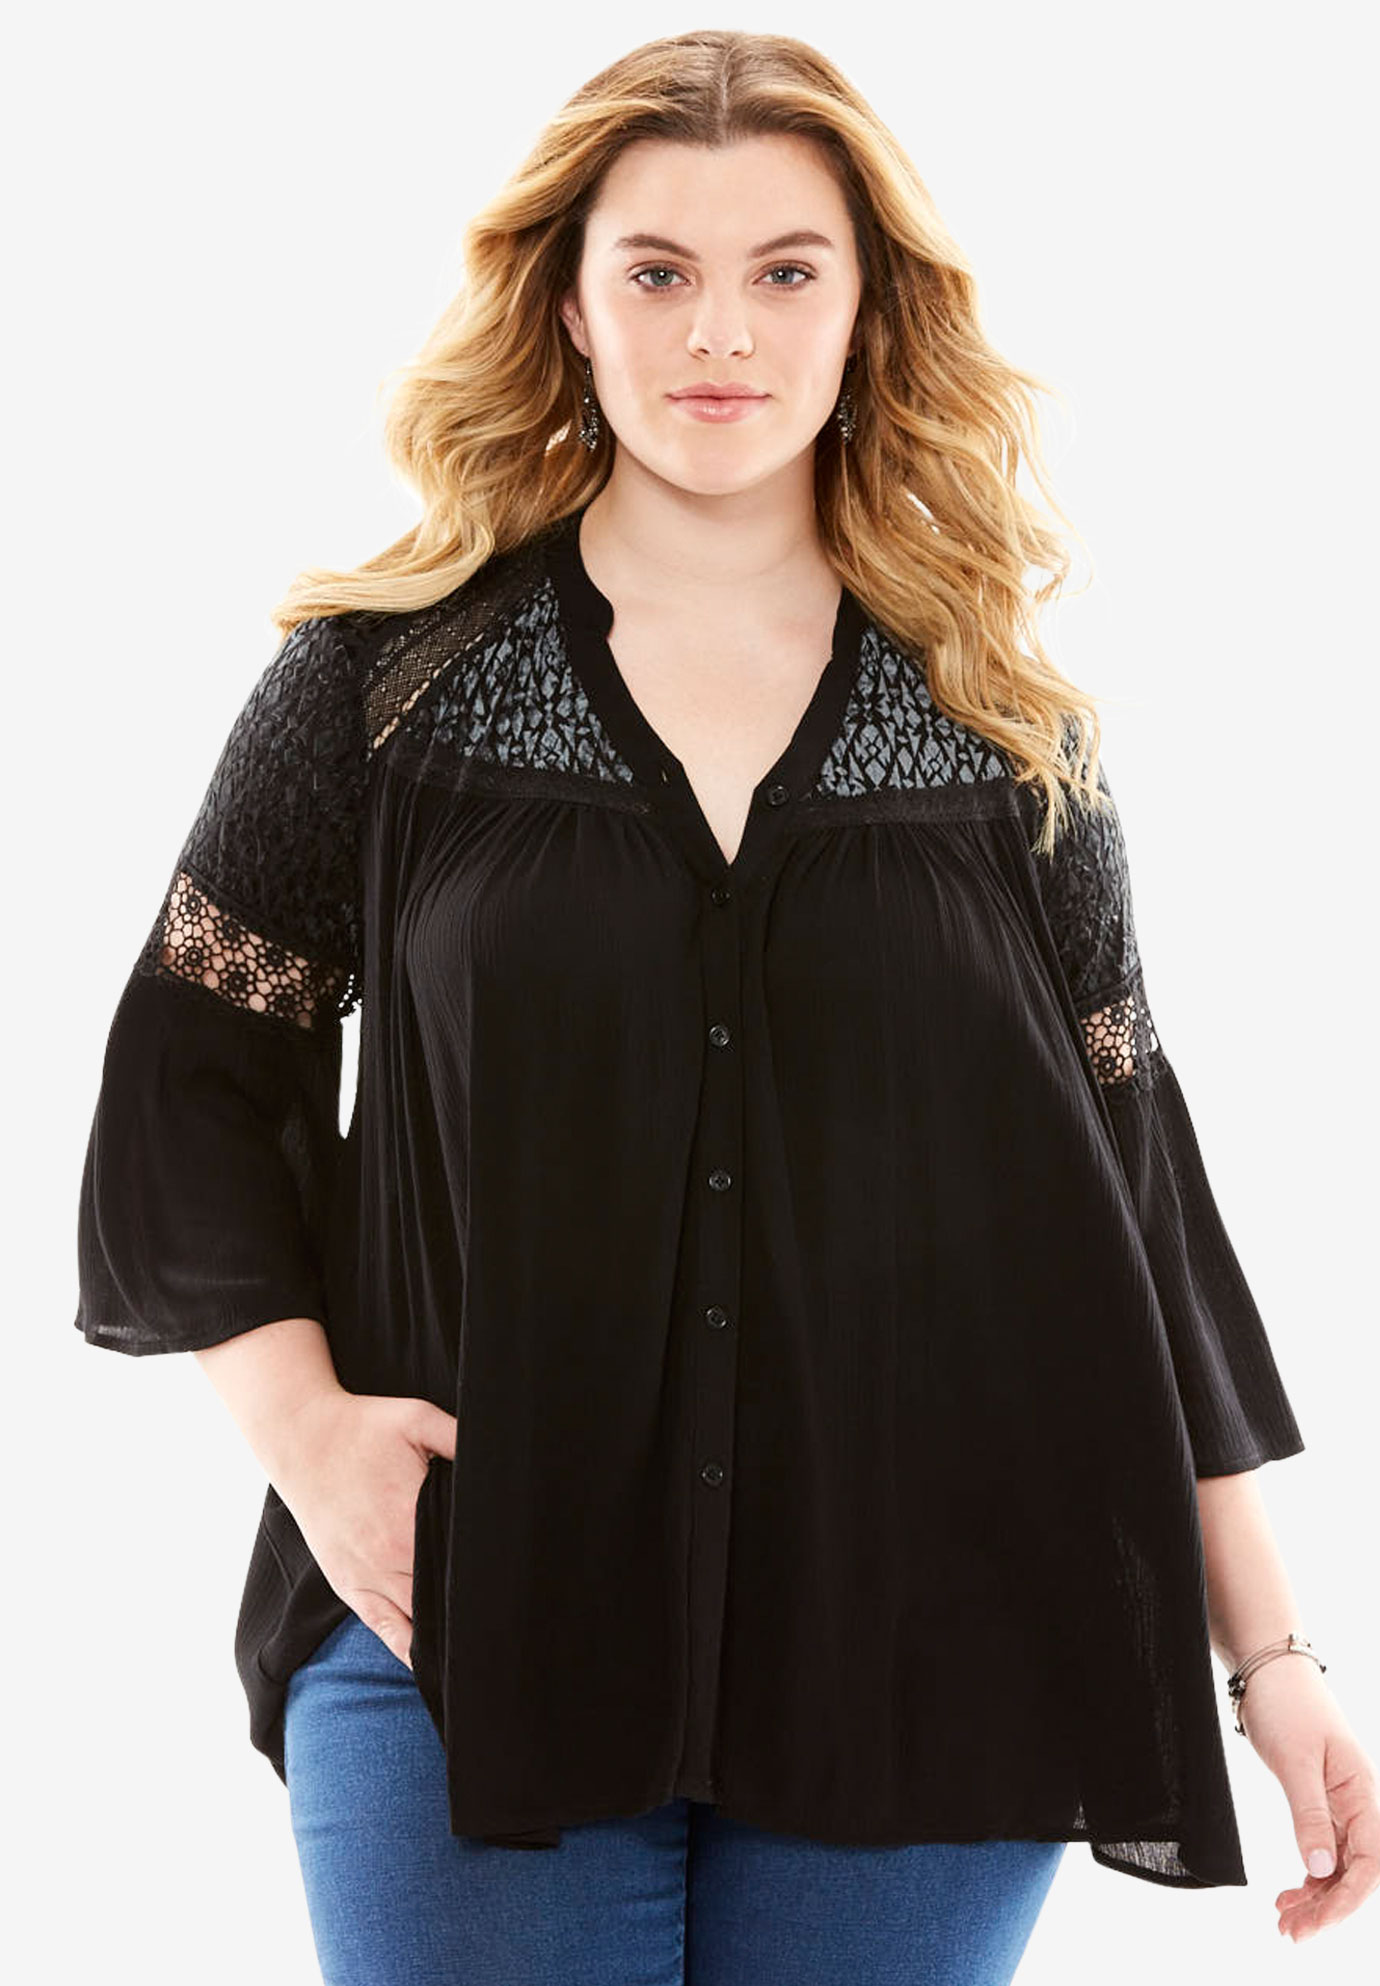 Crinkle Top With Velvet & Lace | Fullbeauty Outlet